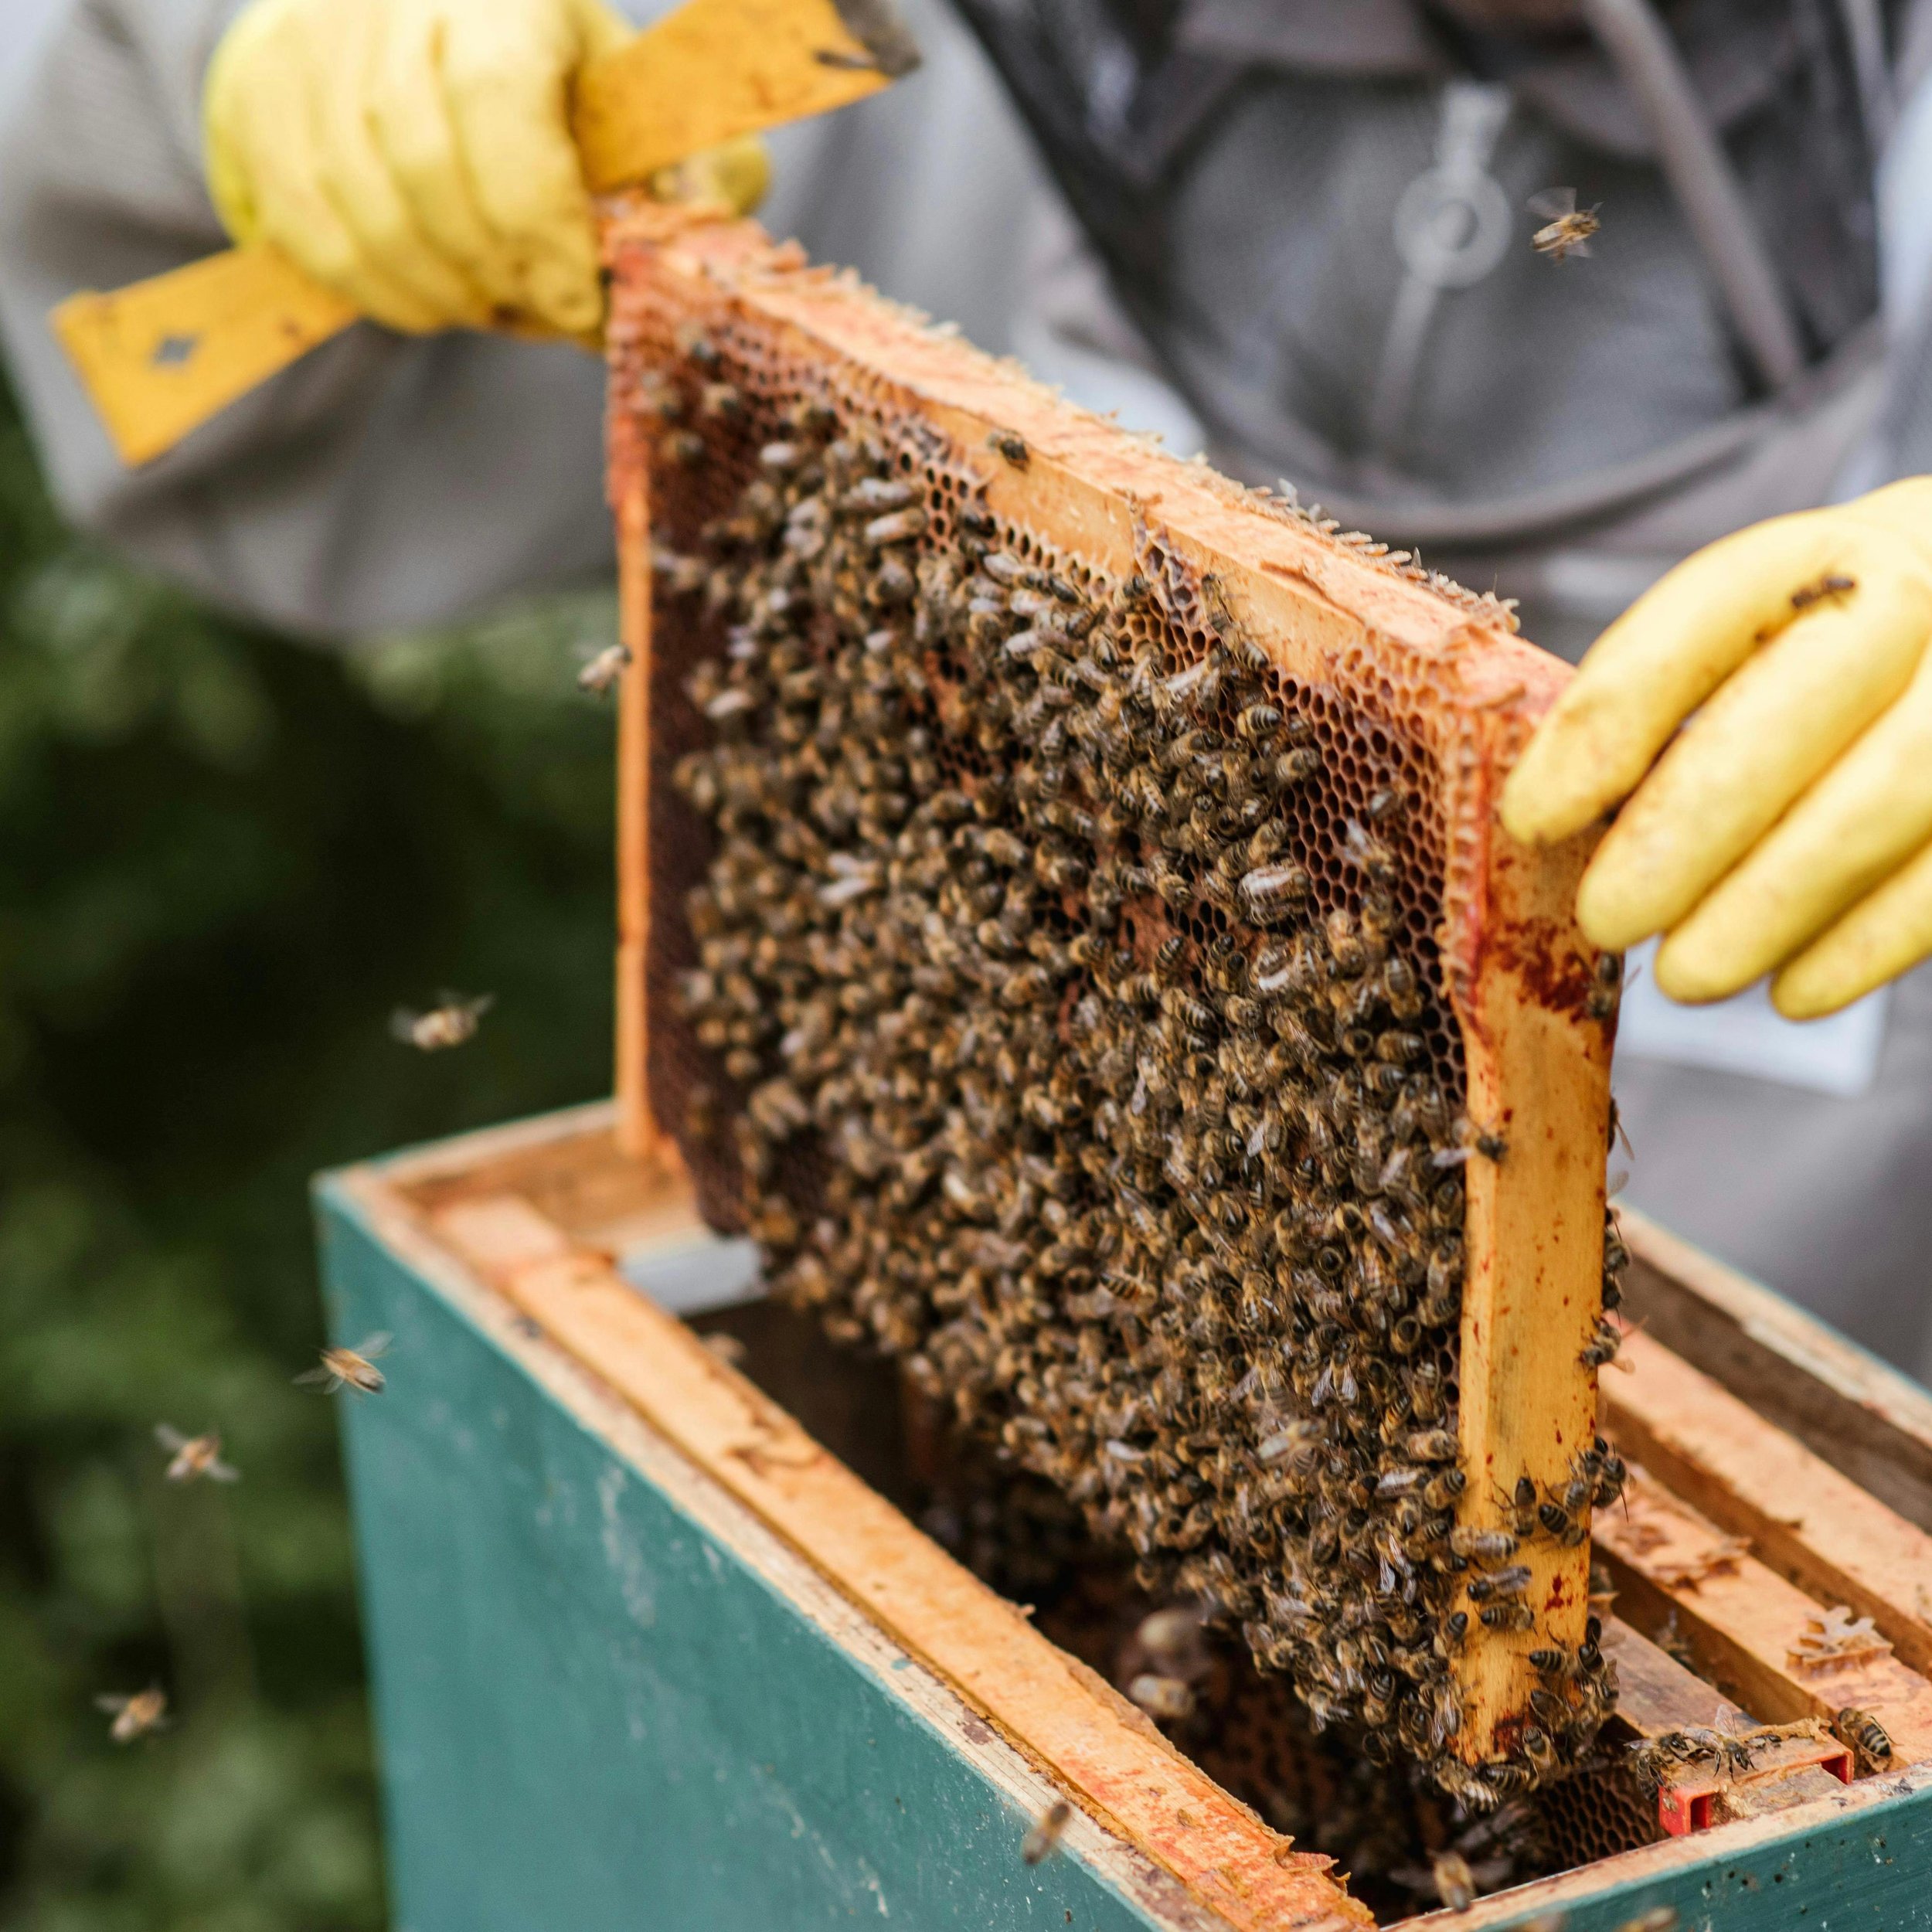 FOR THE BIRDS FESTIVAL
Saturday, May 11th 2024
9am - 3pm
THIRD PRESENTER: @charliebeehoney 
1pm
We are talking about birds and bees at this years For the Birds Festival! Learn about the amazing world of beekeeping with Charlie Bee Honey! We will be h